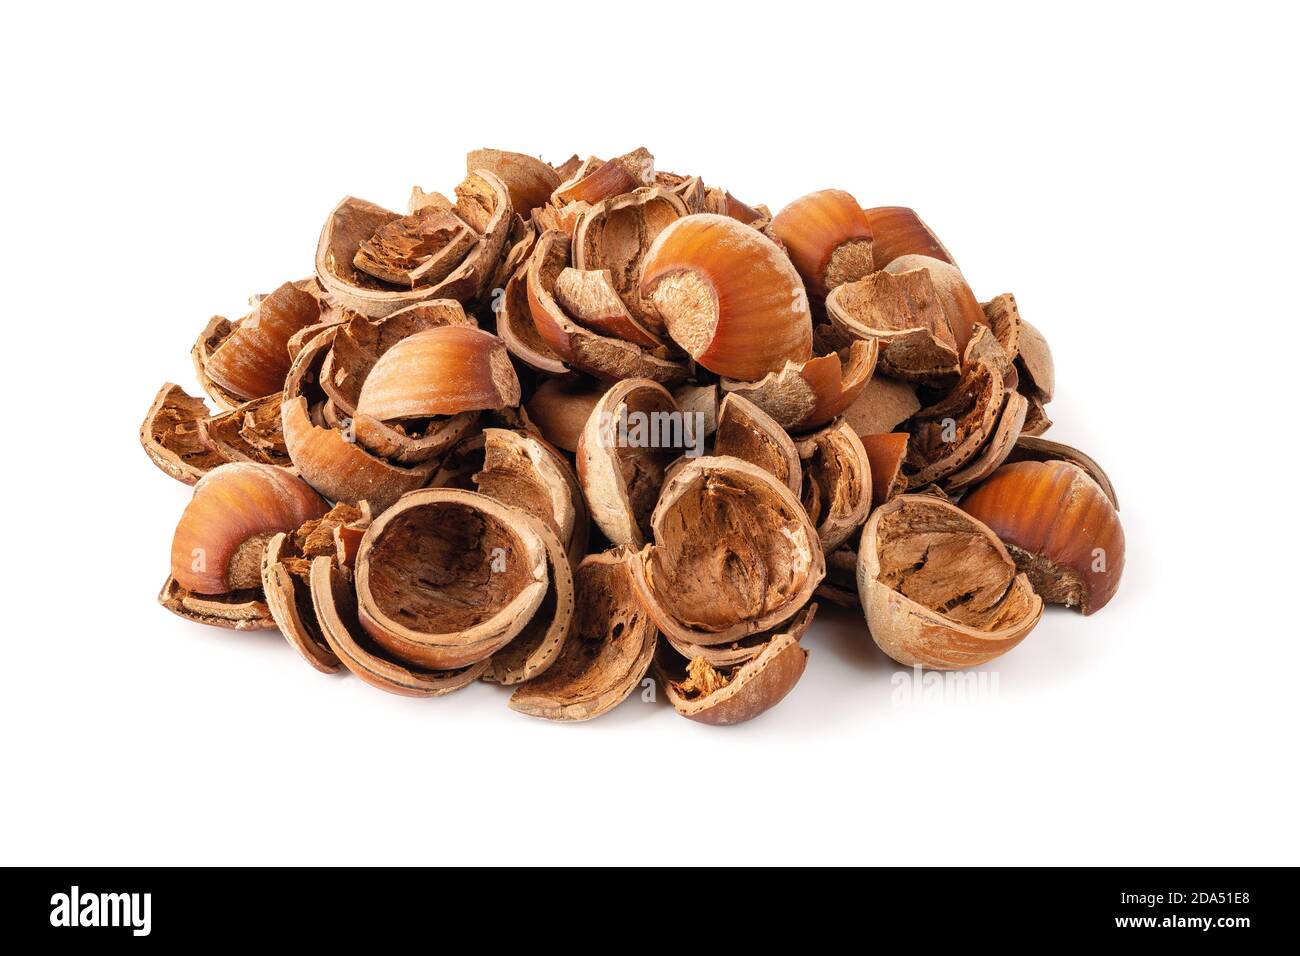 Pile of hazelnut shells isolated on white background. Healthy vegetarian eating, antioxidant and protein source. Food waste and peelings. Front viiew. Stock Photo